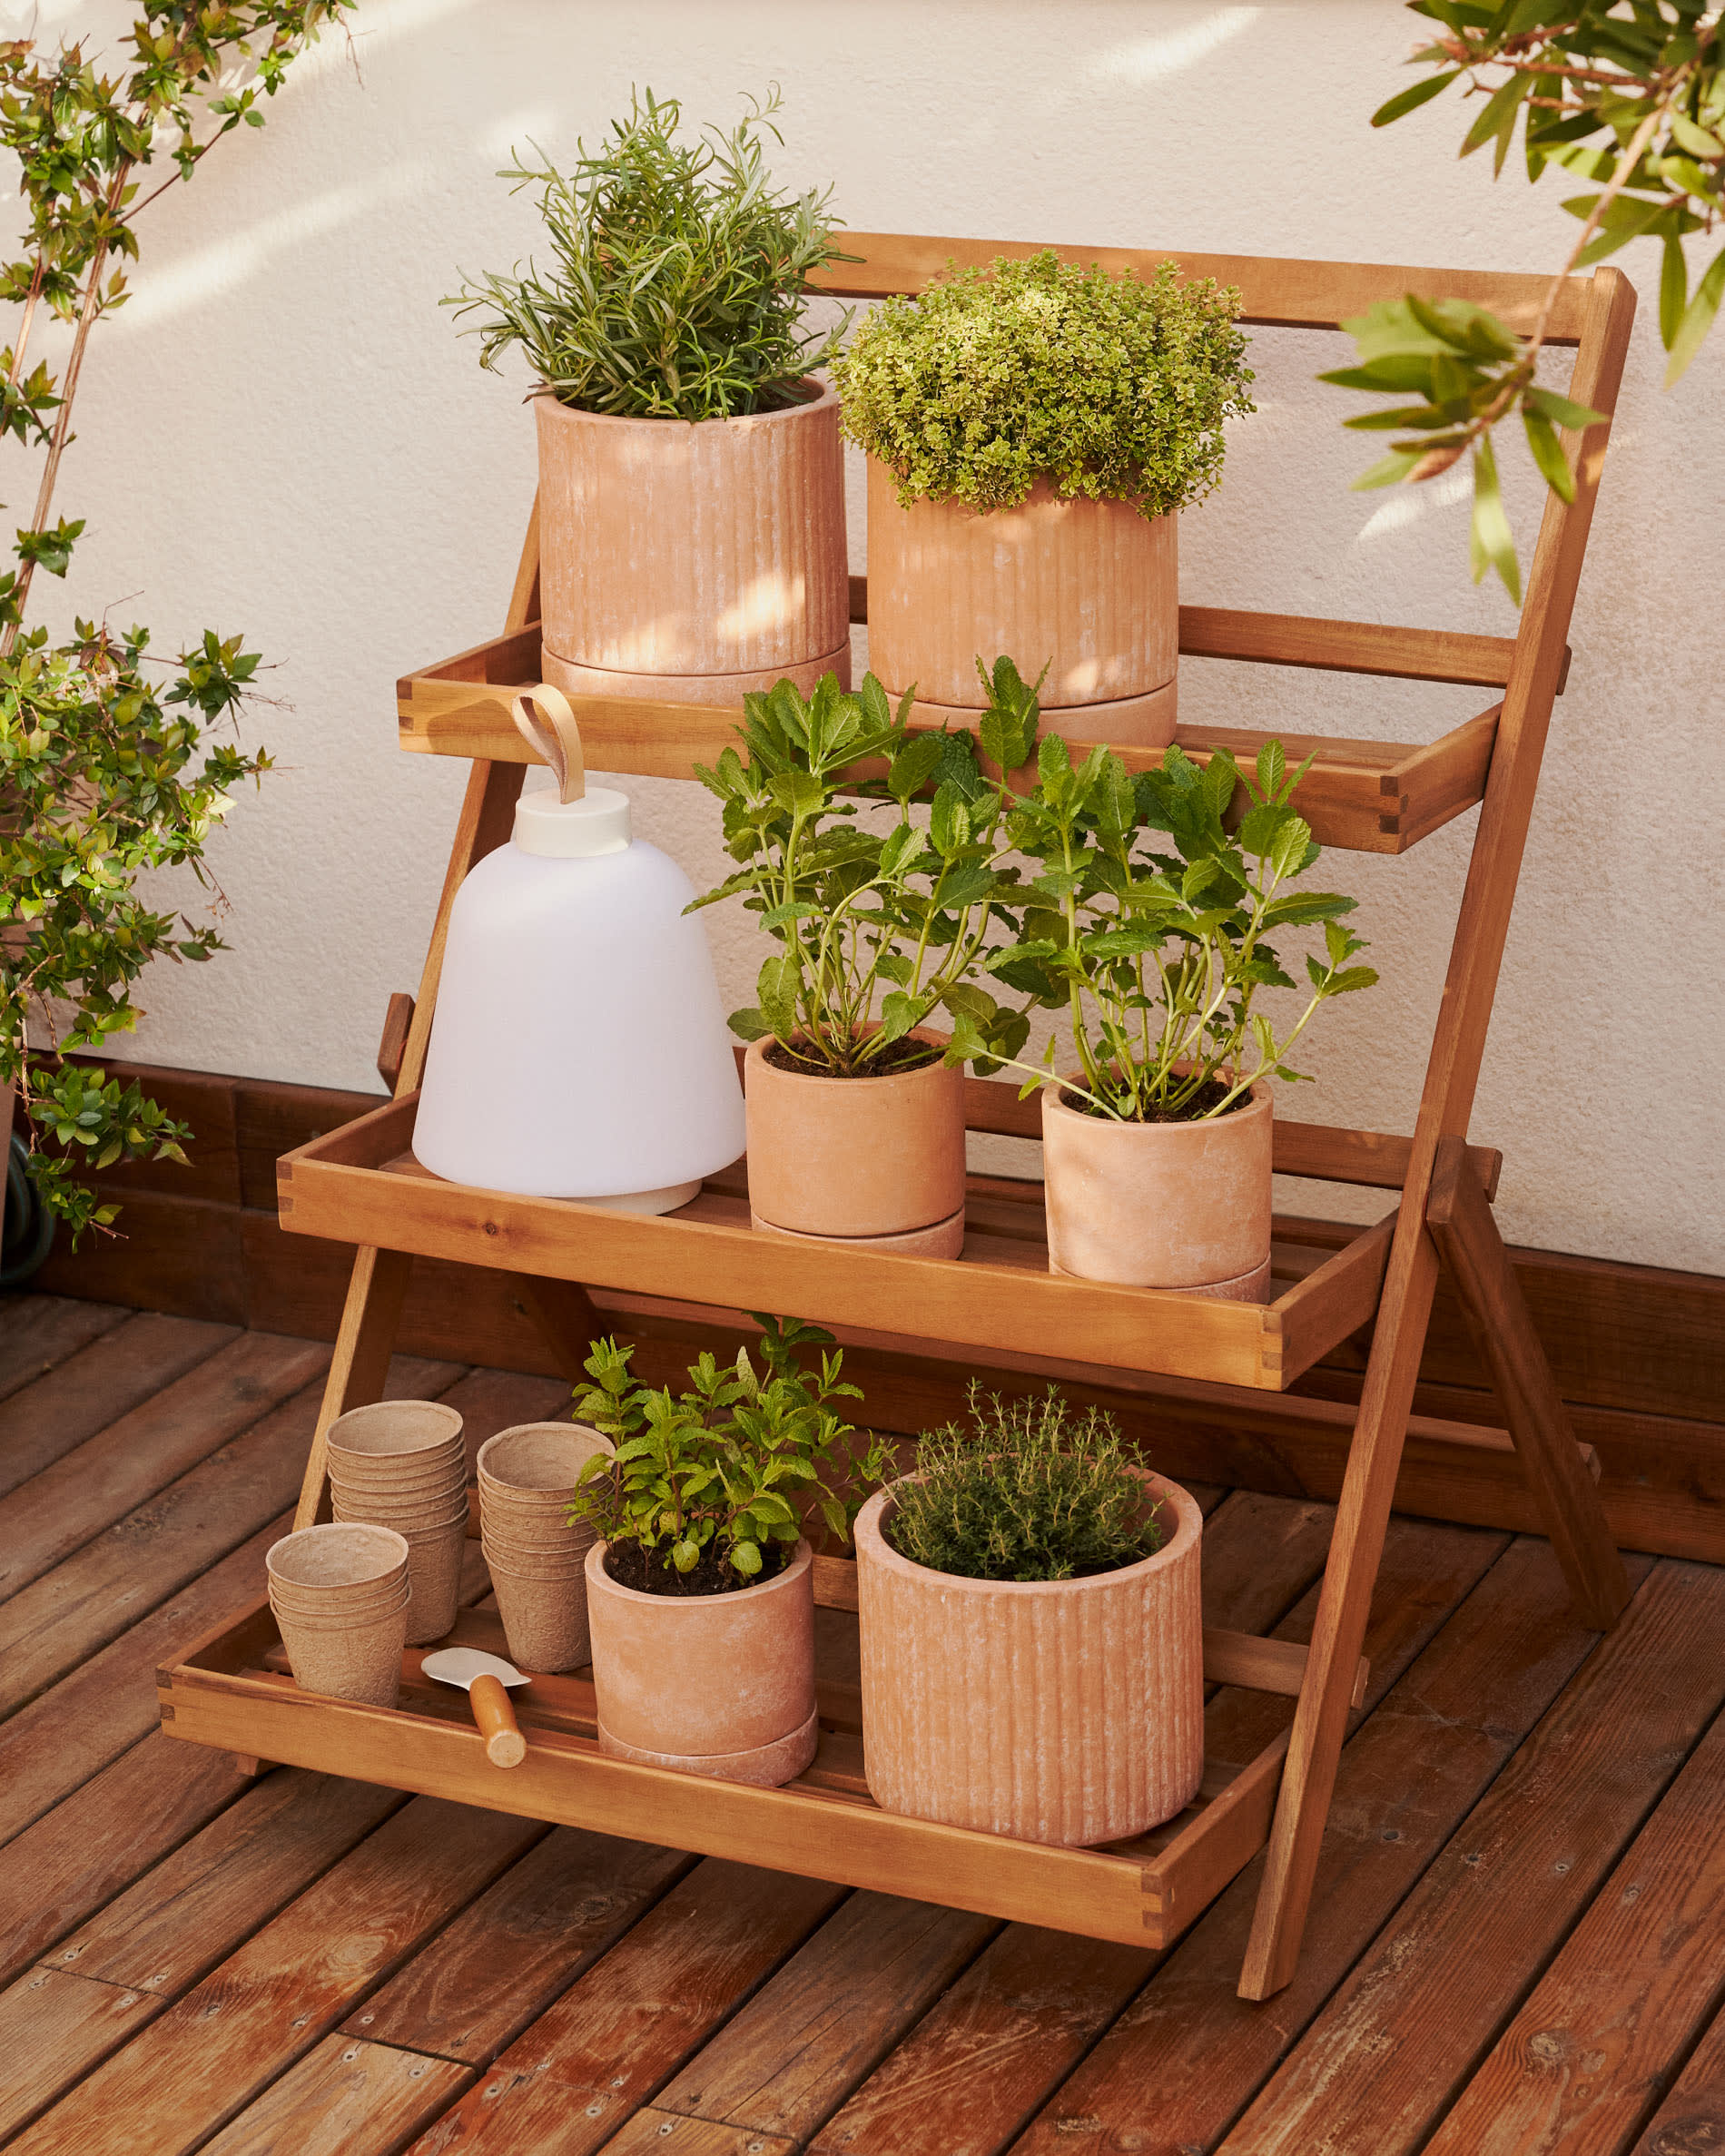 Victora outdoor shelving unit made from solid acacia wood, 70 x 85 cm